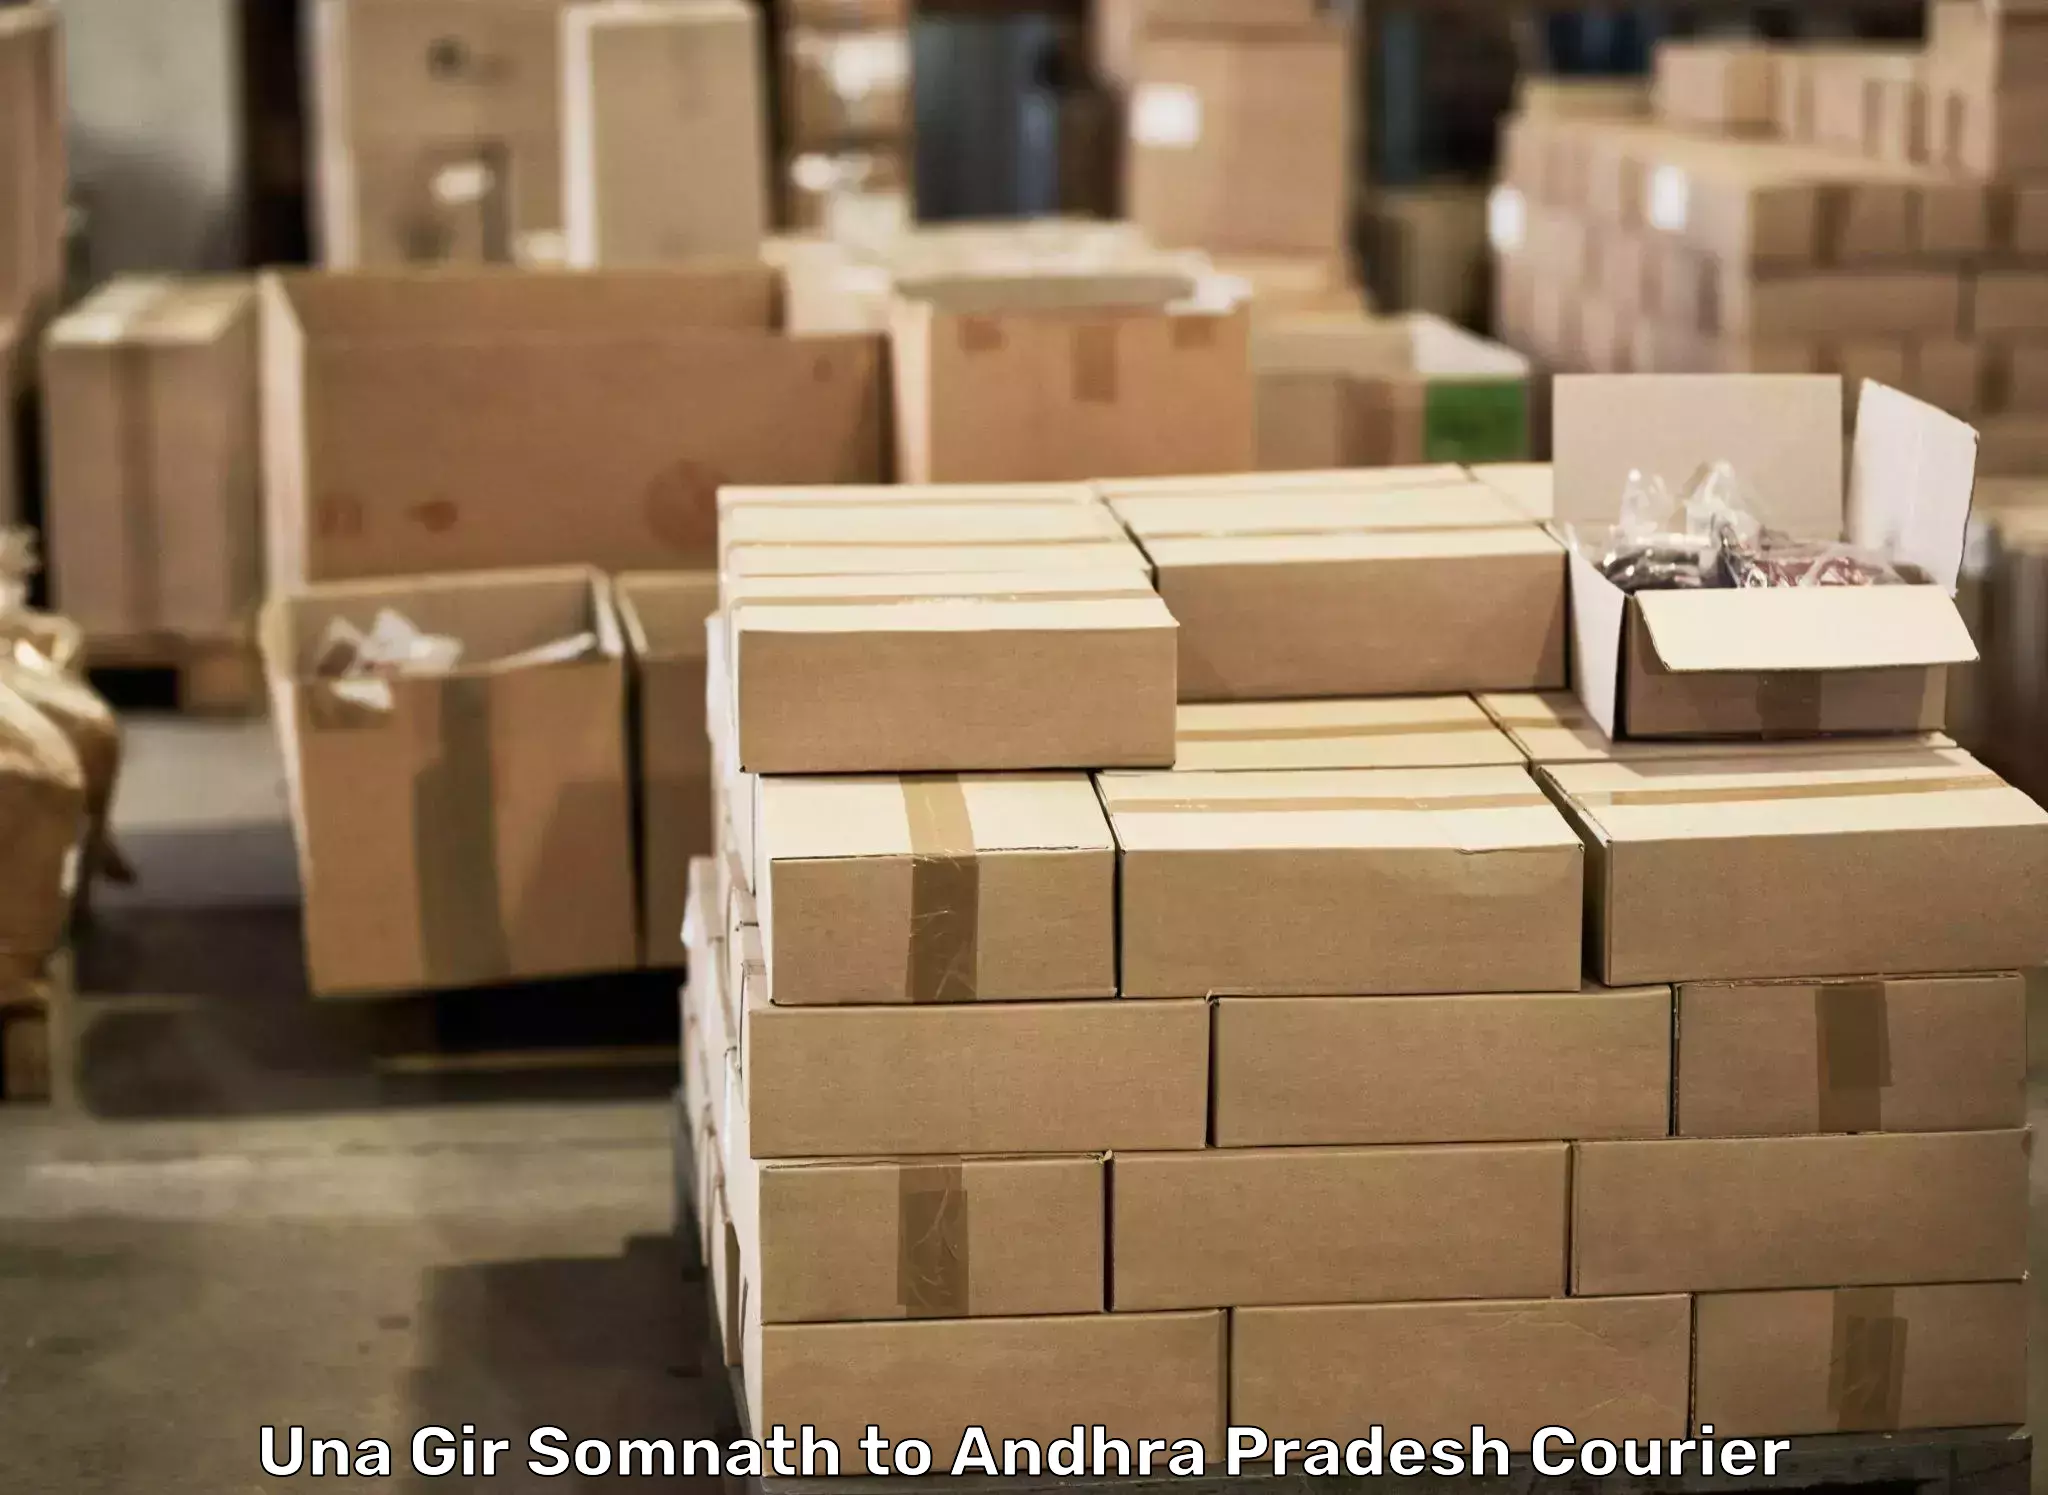 Moving and packing experts Una Gir Somnath to Devarapalli